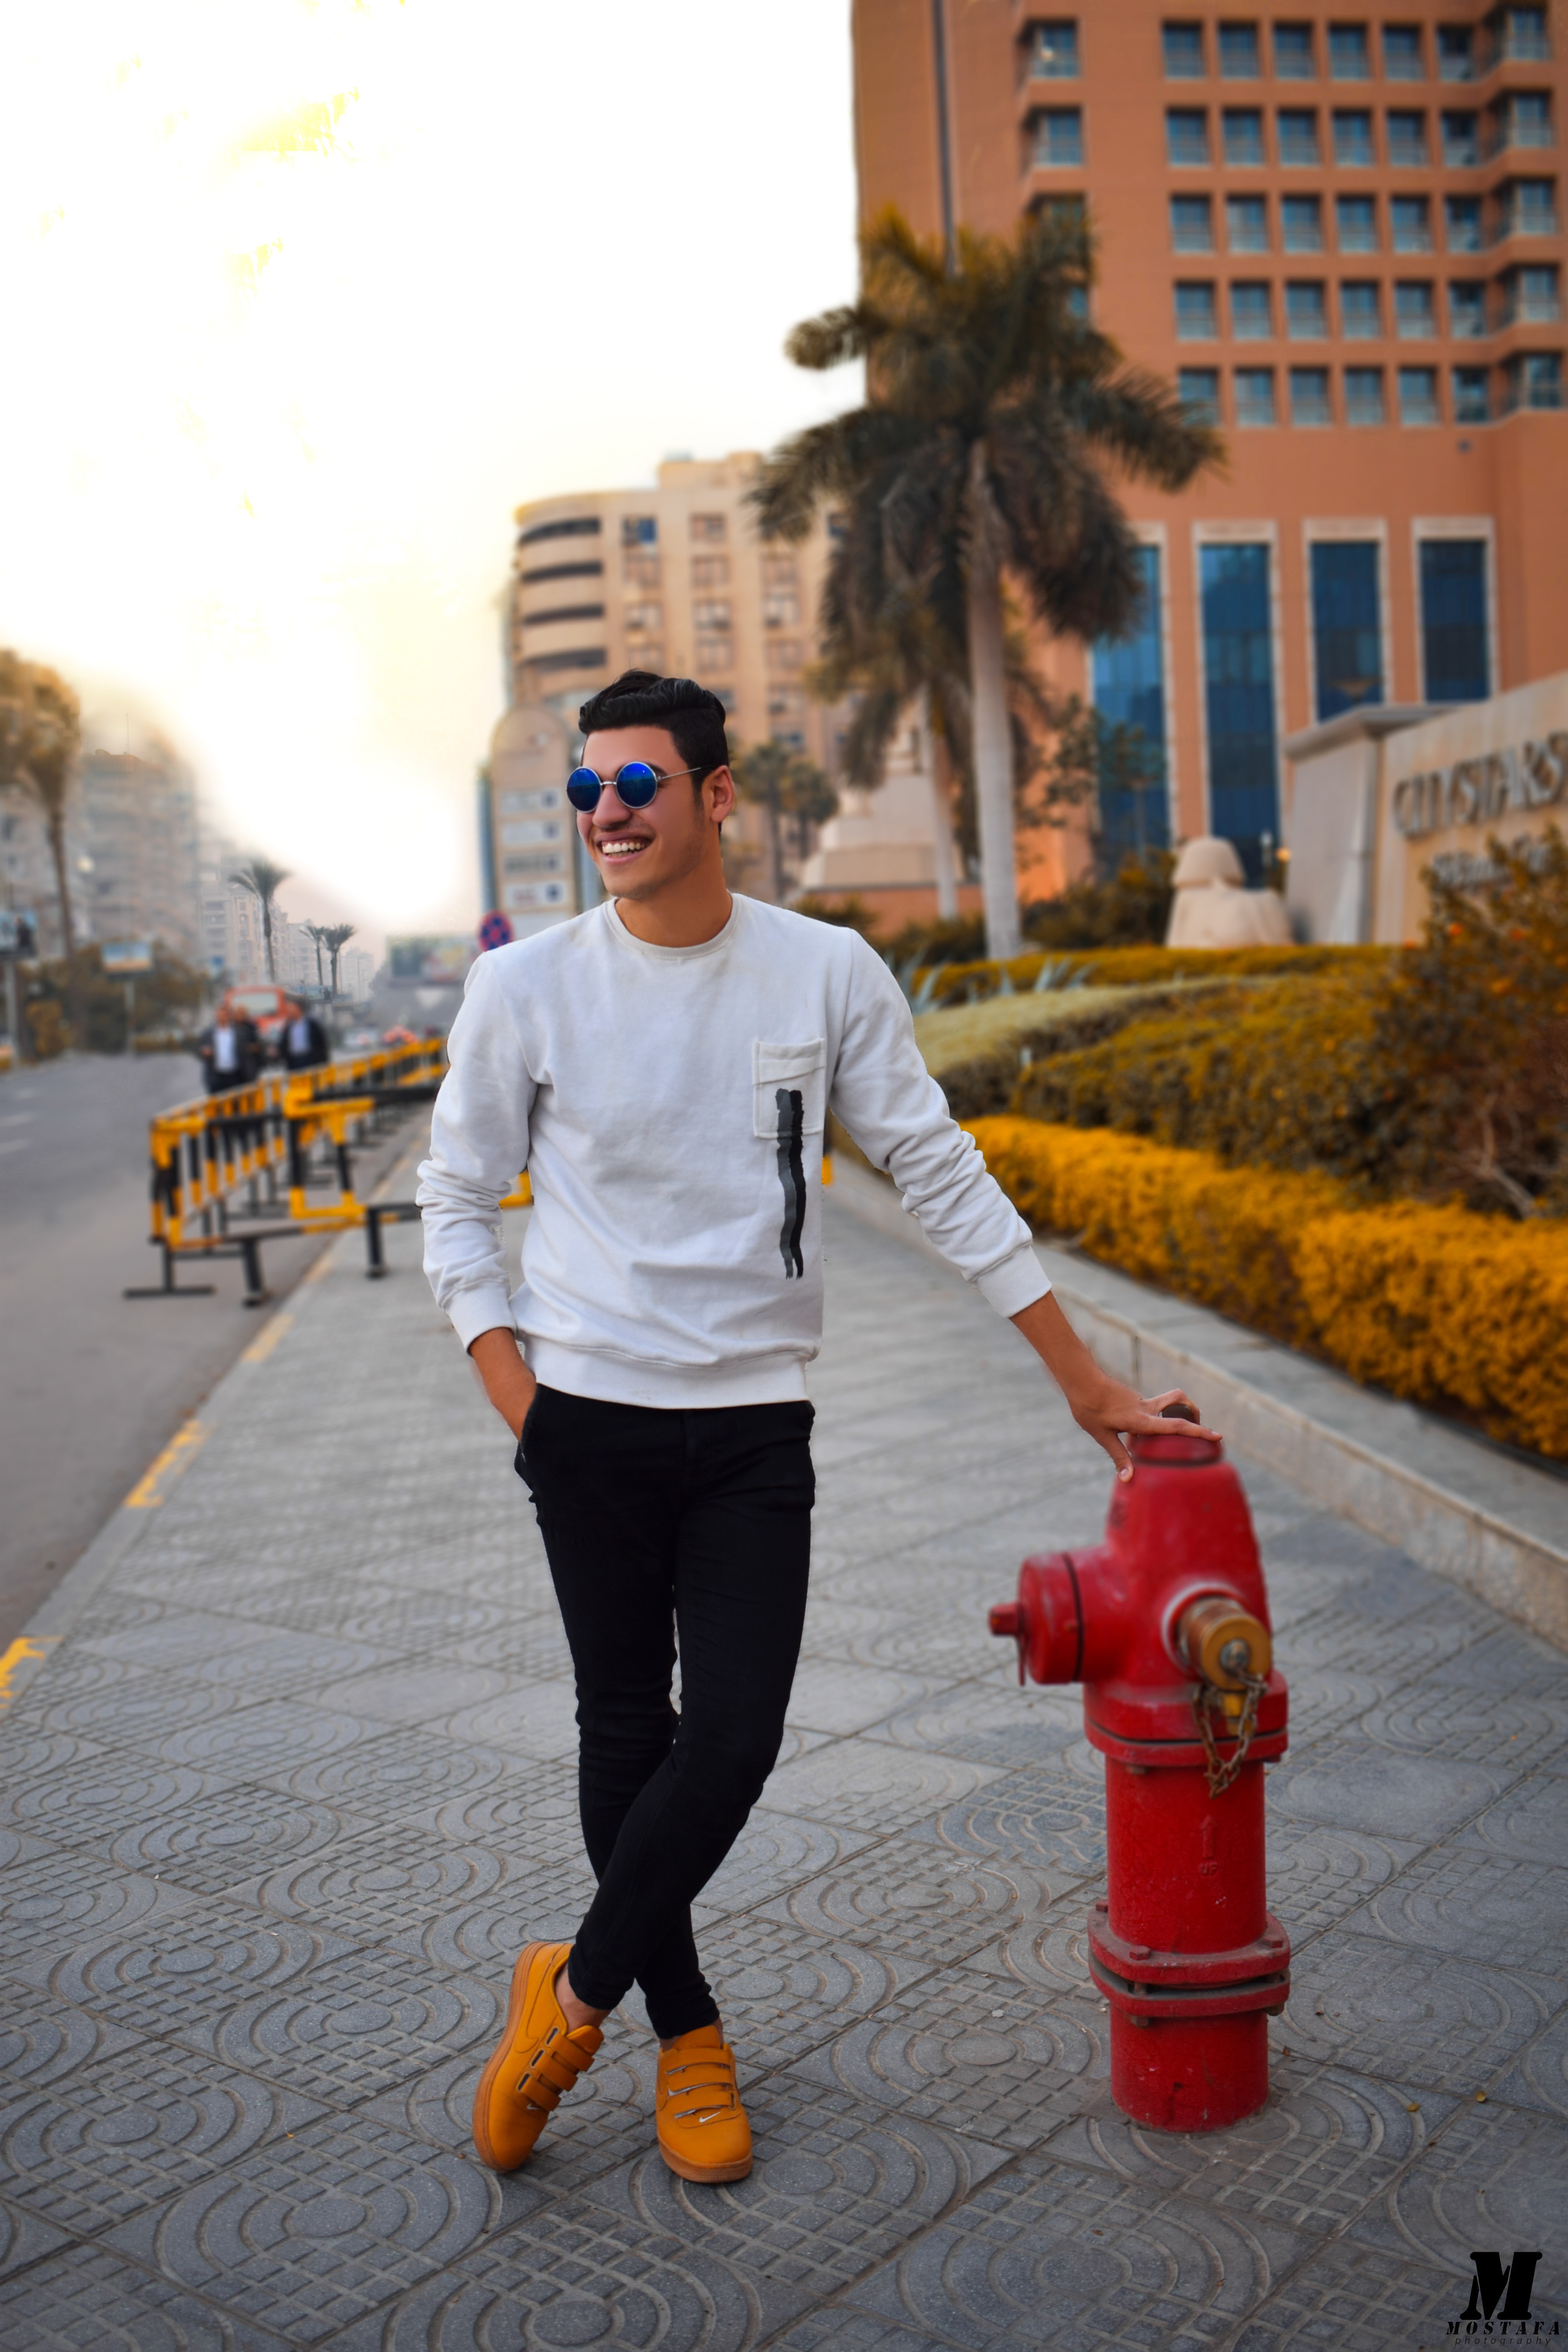 Man in white long-sleeved shirt holding red fire hydrant photo